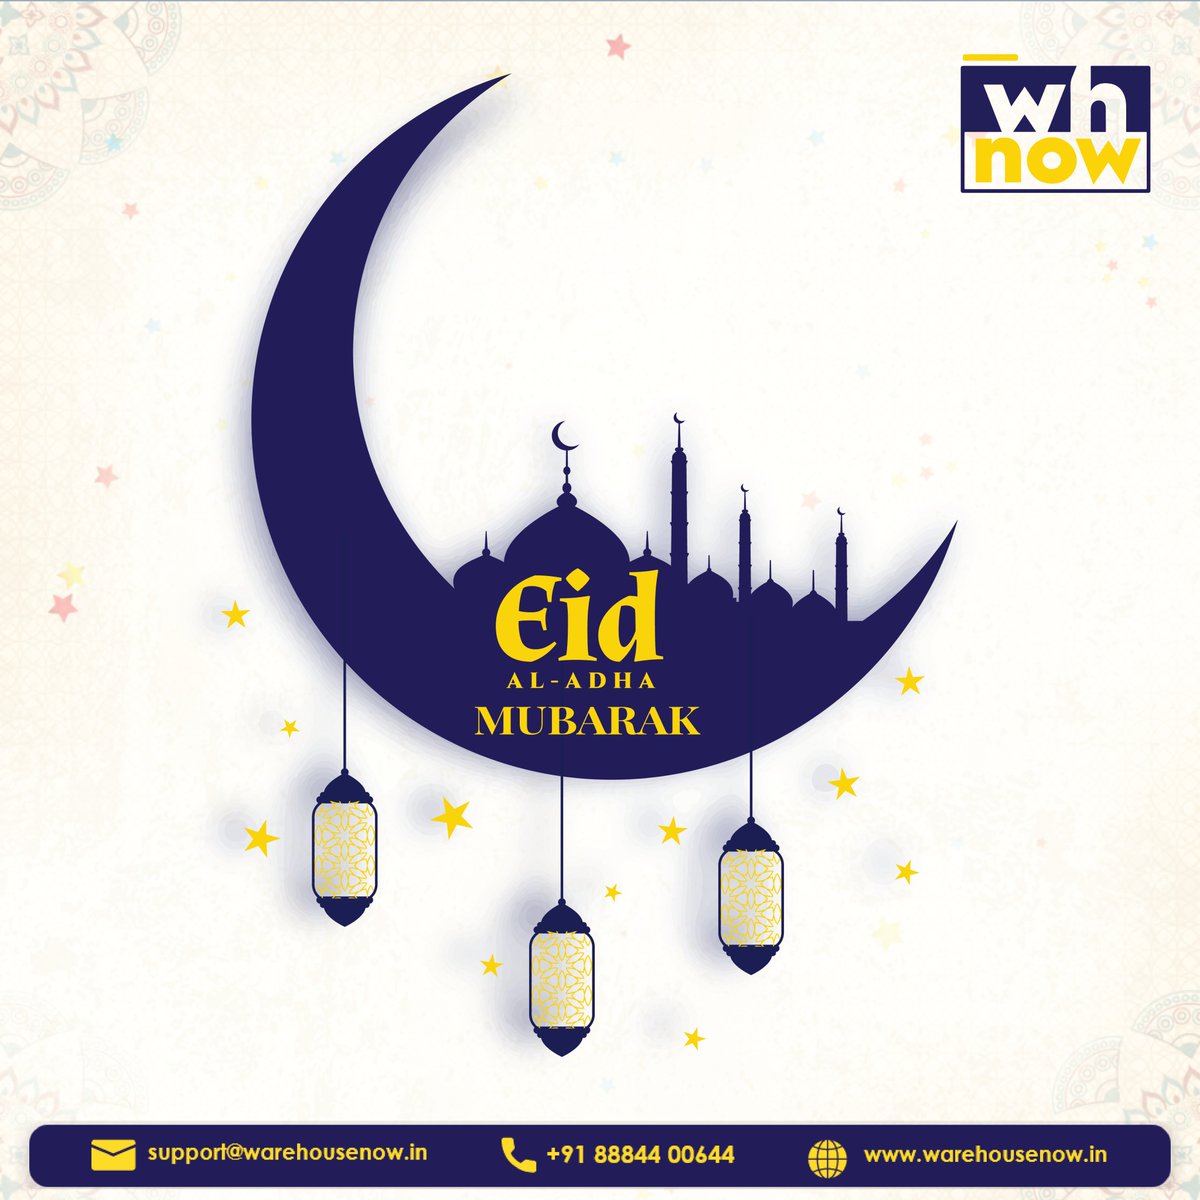 Eid-Al-Adha is a festival that teaches us the spirit of giving. And on this auspicious day Warehouse Now wishes you all a happy Eid-Ad-Adha and desires that the almighty answers all your prayers and bless you with a prosperous life.
#eidmubarak #eidmubarak2021 #supllychain #whnow